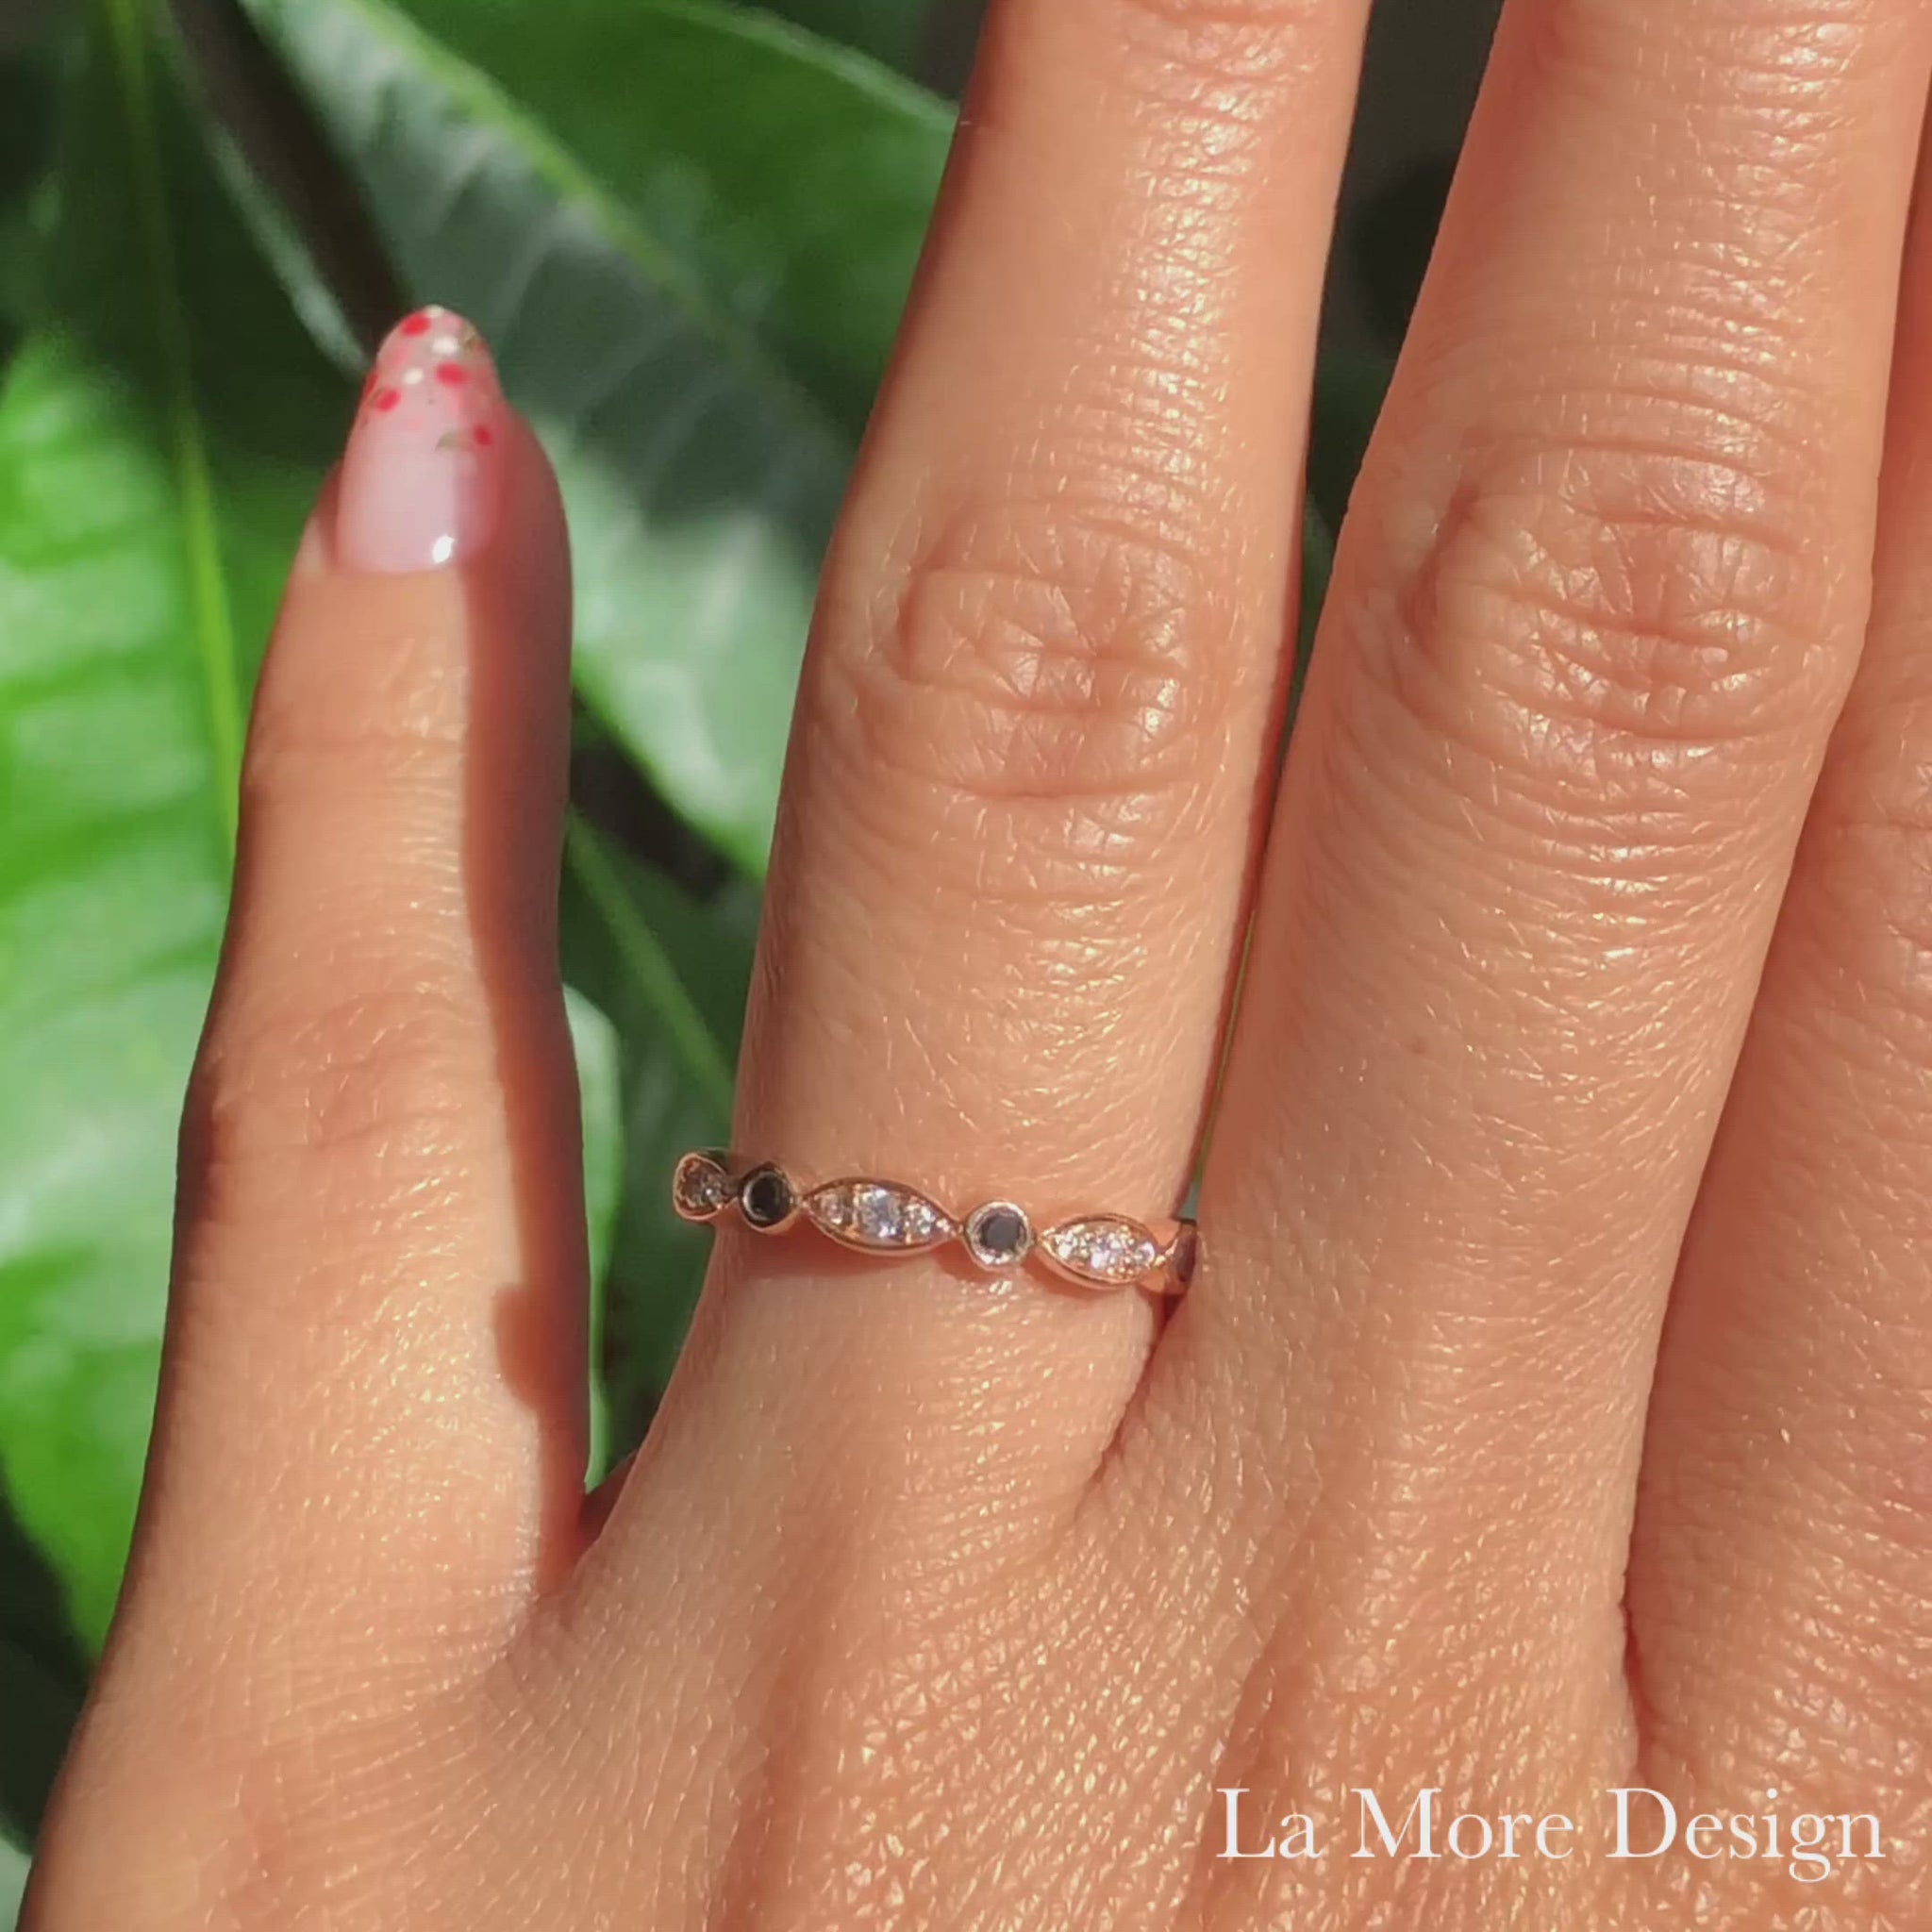 This unique wedding band features alternating round and marquise-shaped frames studded with dazzling black and white diamonds set in 14k rose gold. The delicate scalloped design makes this diamond ring perfect to be paired with most of our engagement rings or also can be worn alone or in a stack. It can be made in your choice of platinum or 18k or 14k yellow, rose, or white gold.